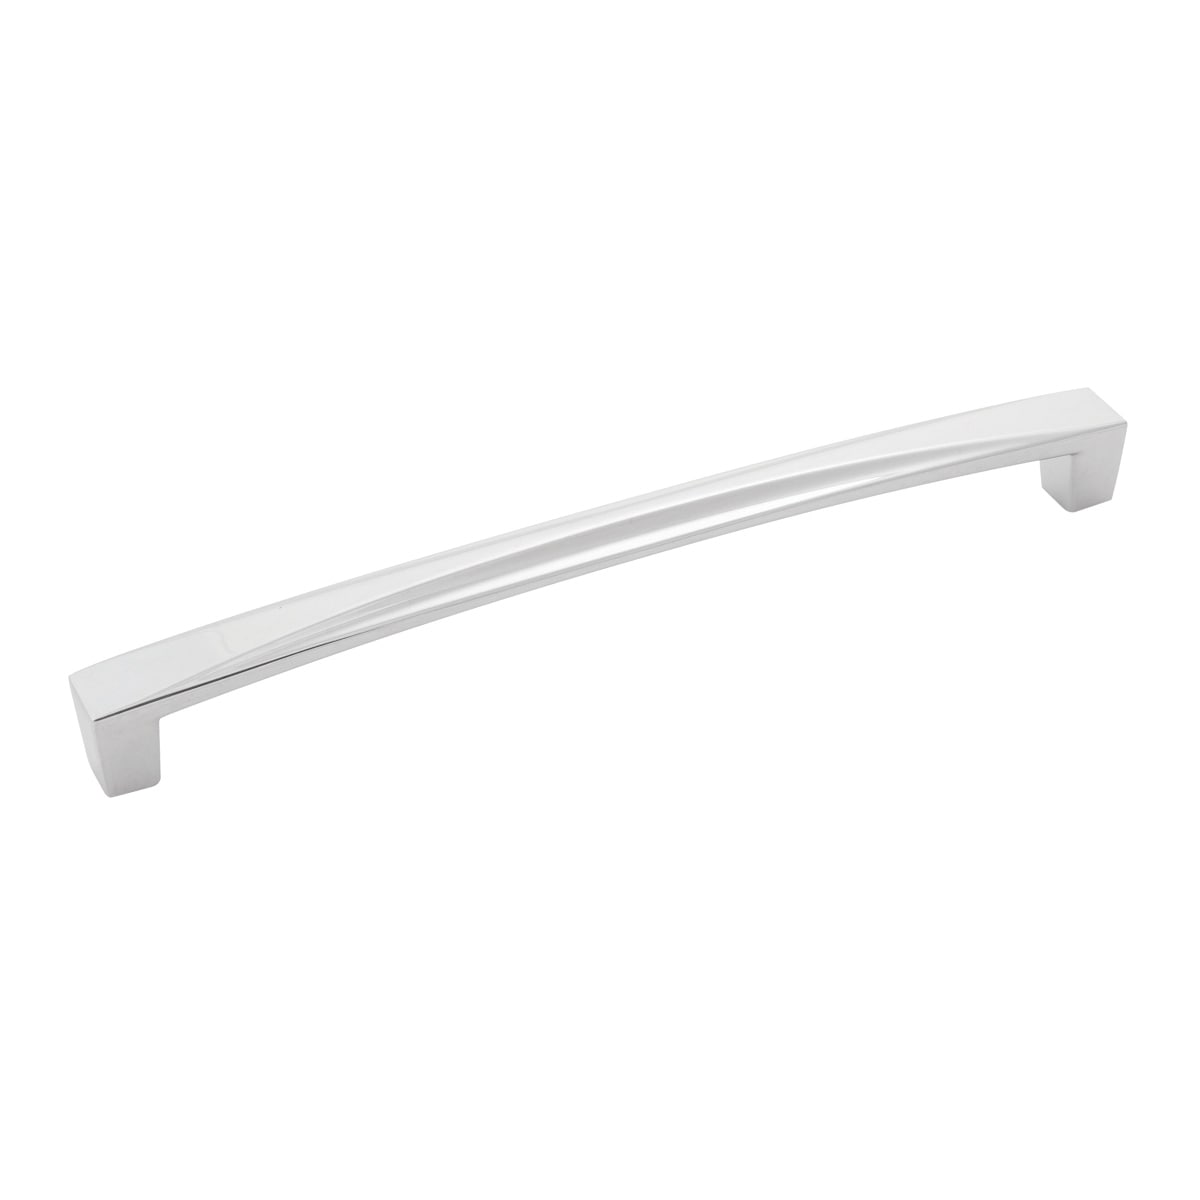 Crest 7-9/16-in Center to Center Chrome Arch Handle Drawer Pulls (10-Pack) | - Hickory Hardware H076133-CH-10B